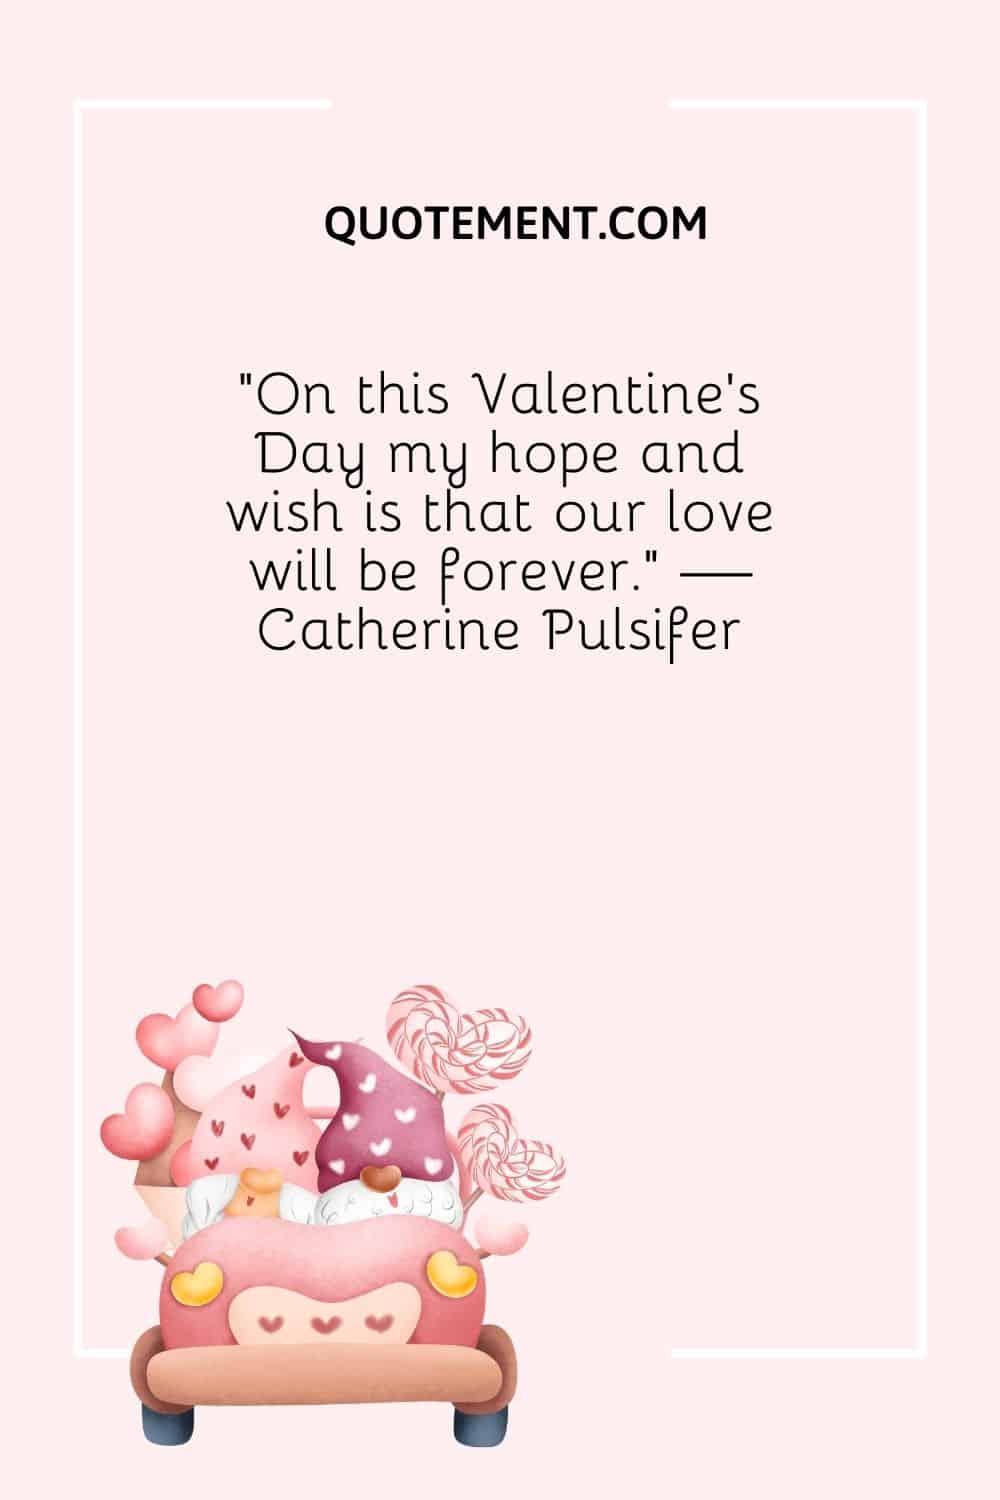 “On this Valentine’s Day my hope and wish is that our love will be forever.” — Catherine Pulsifer